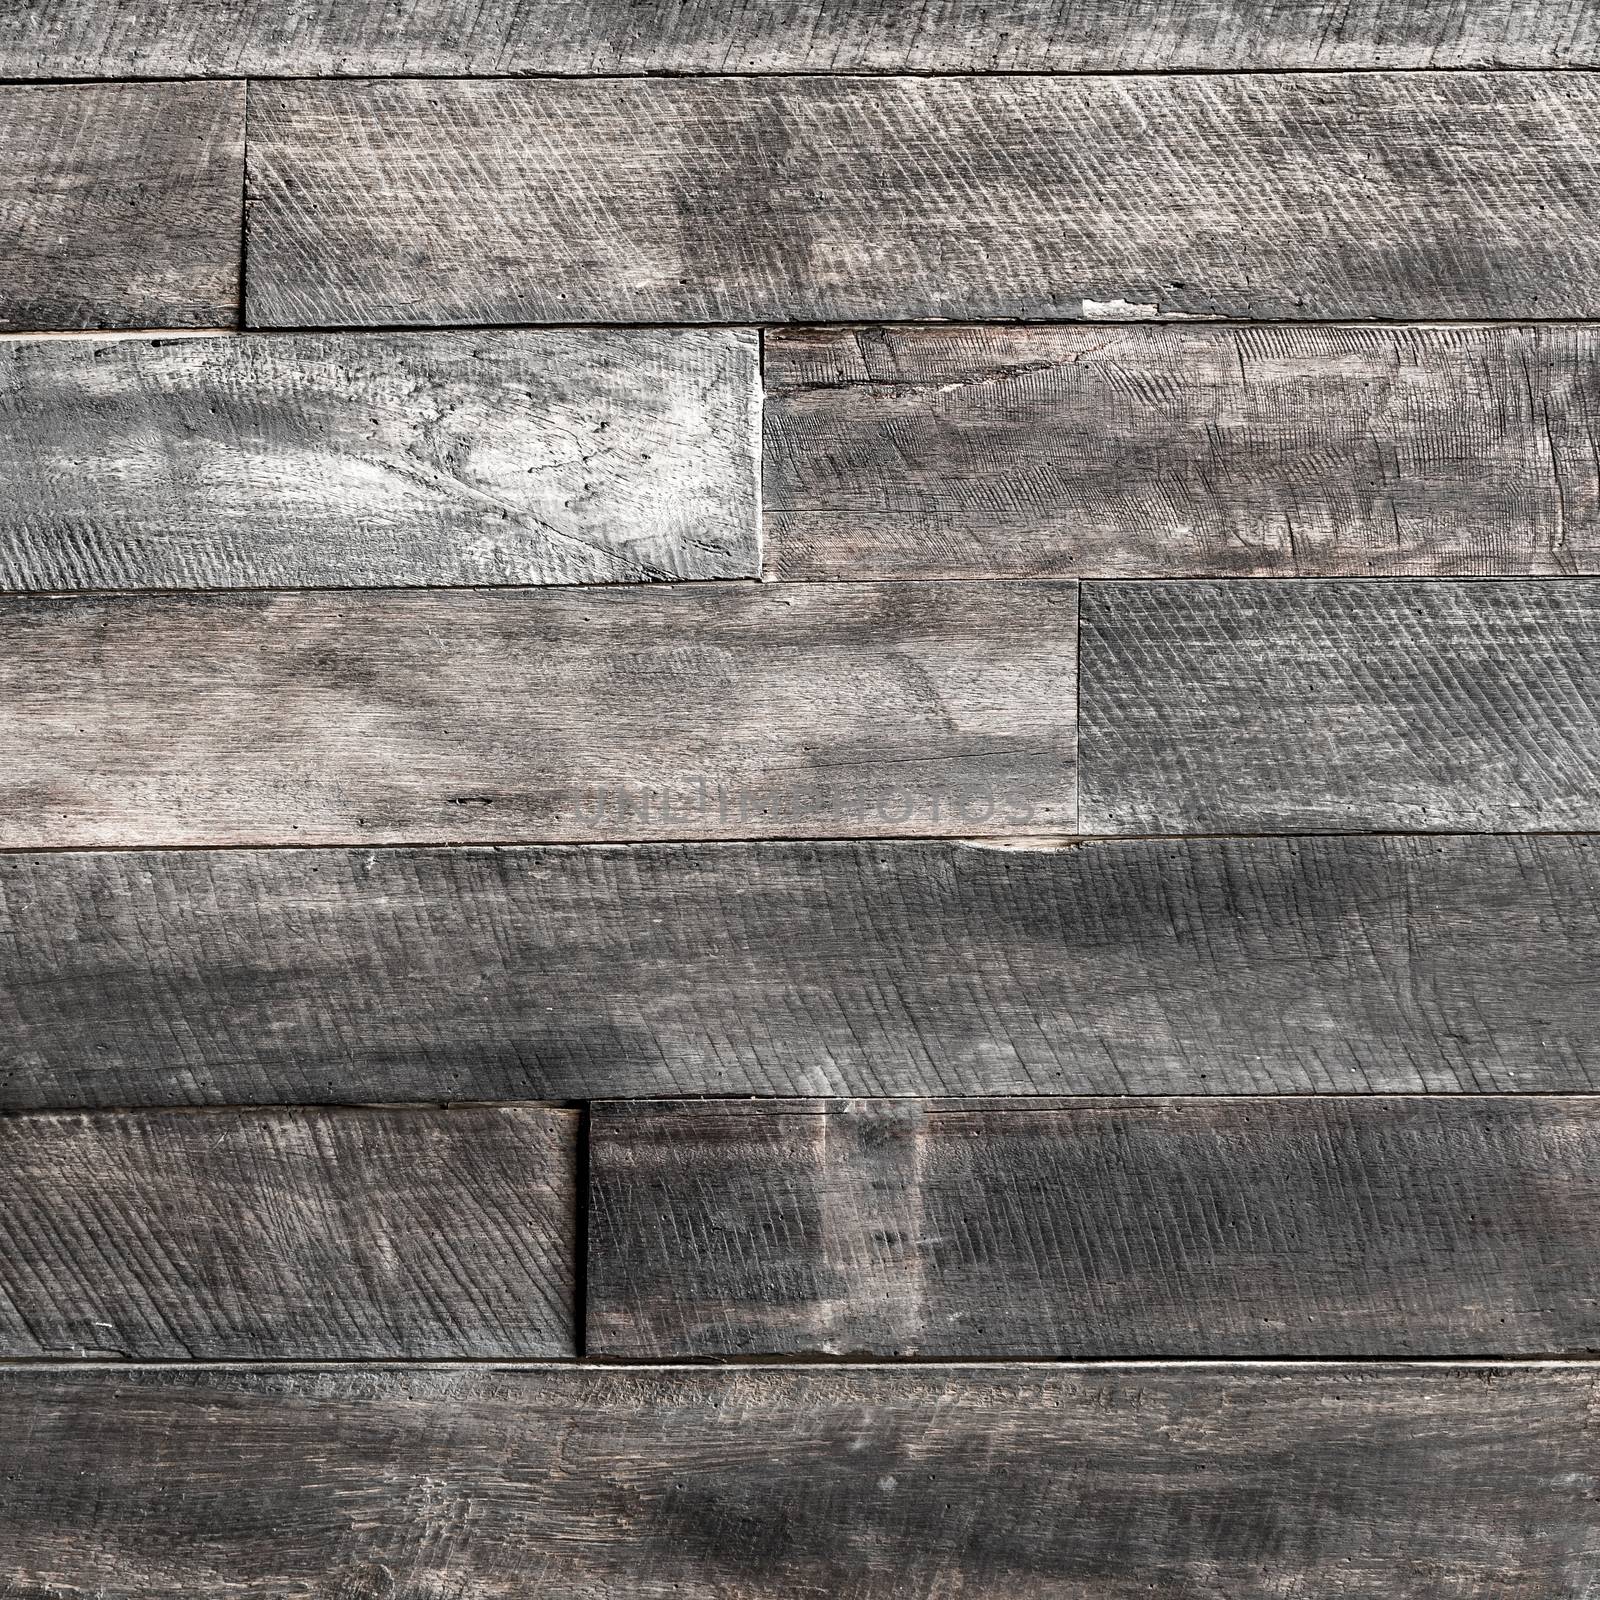 close up of wall made of wooden planks wood texture background old panels.